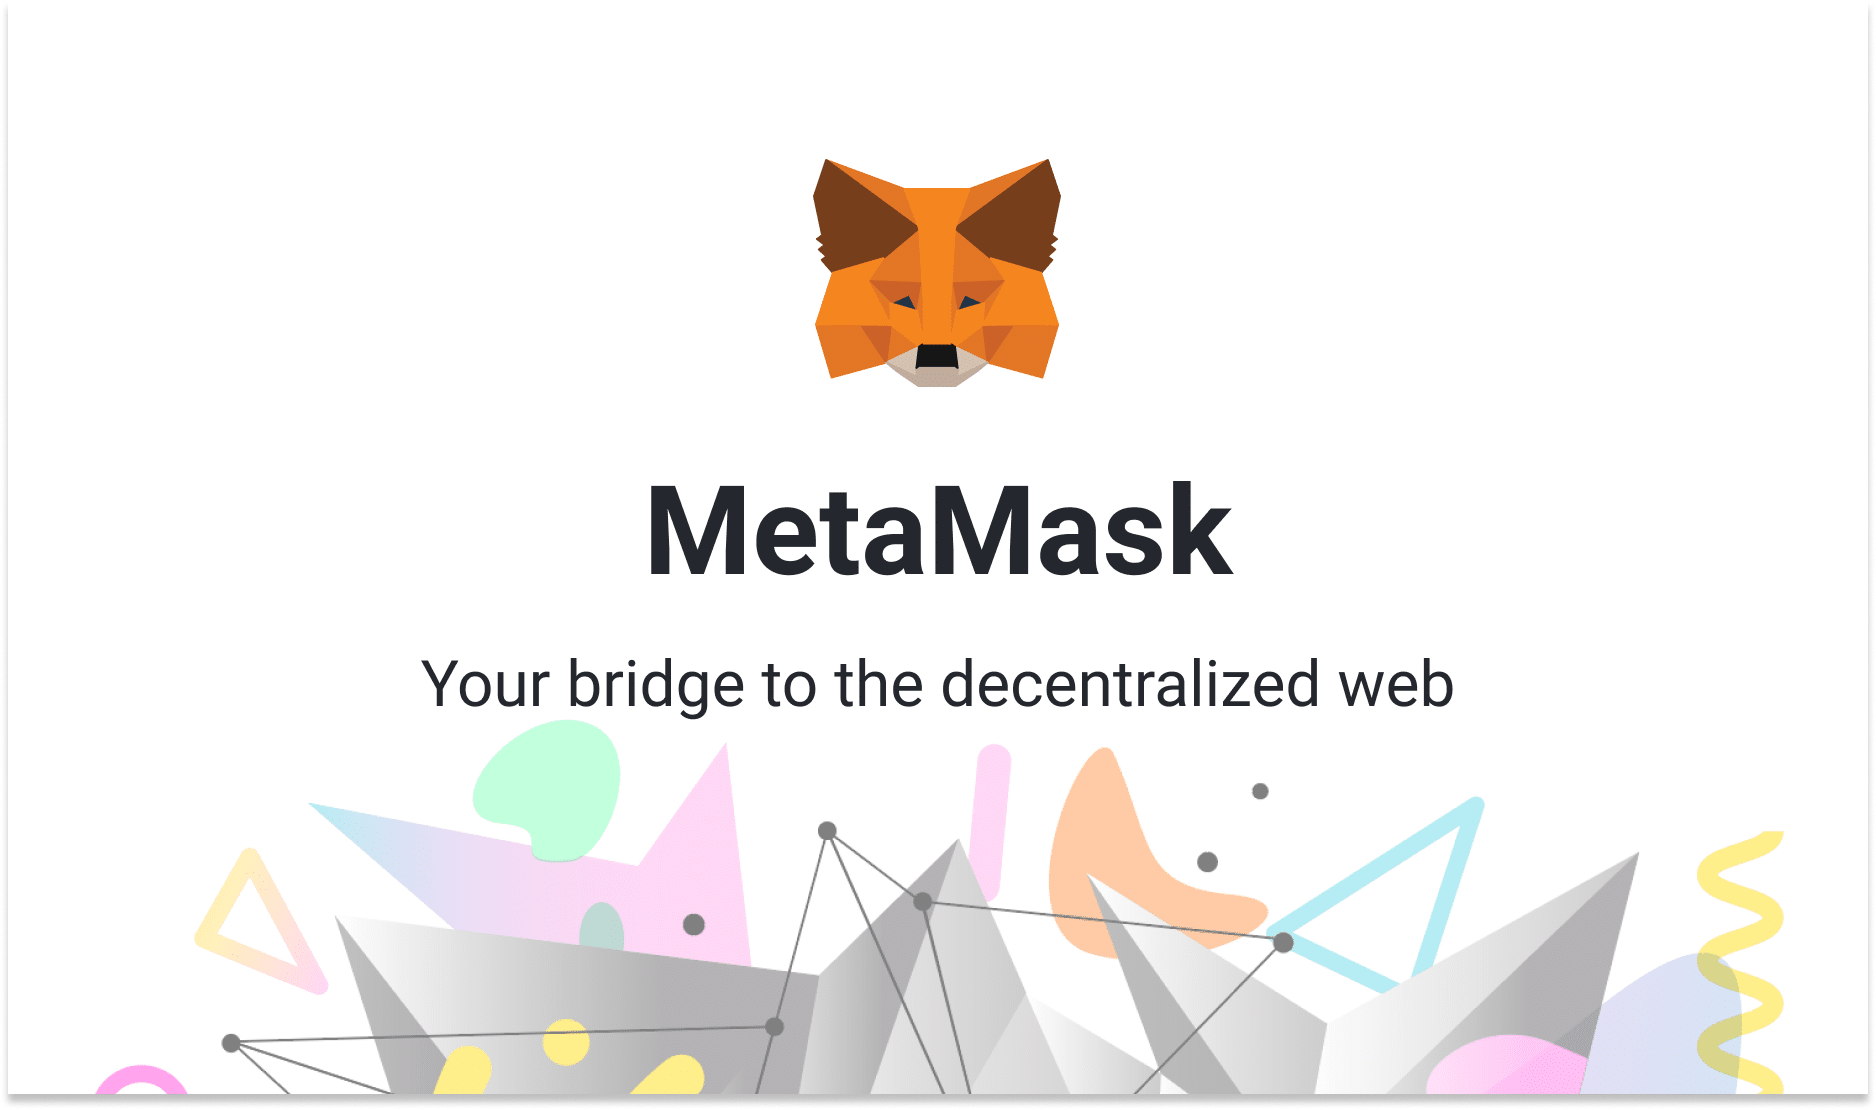 Image featuring the official Metamask logo